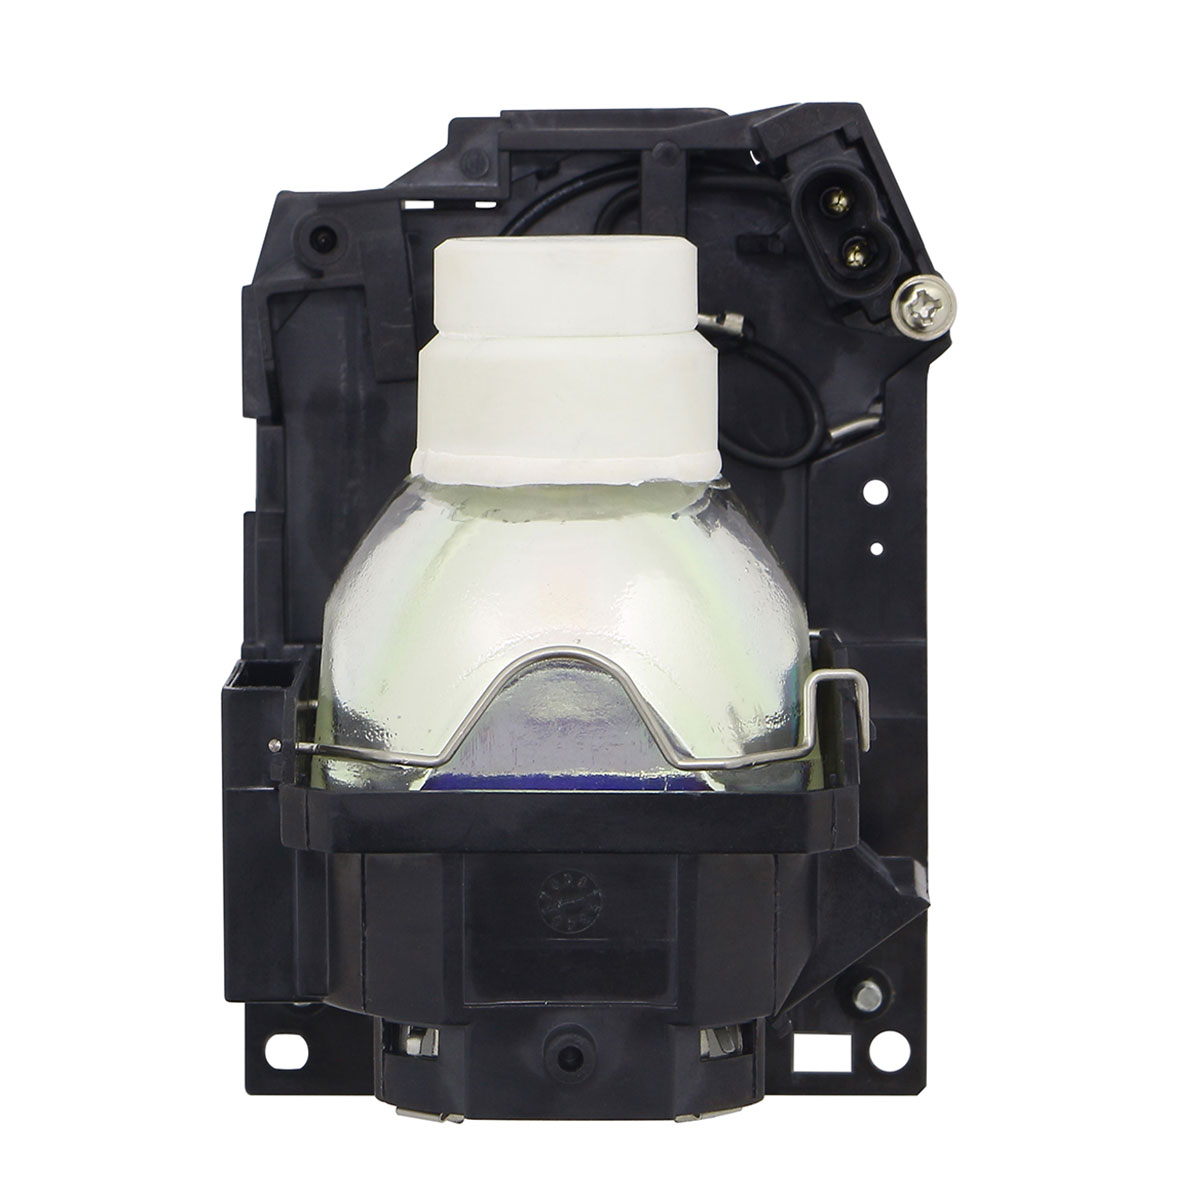 DT01491 Replacement Lamp & Housing for Hitachi Projectors - image 4 of 6